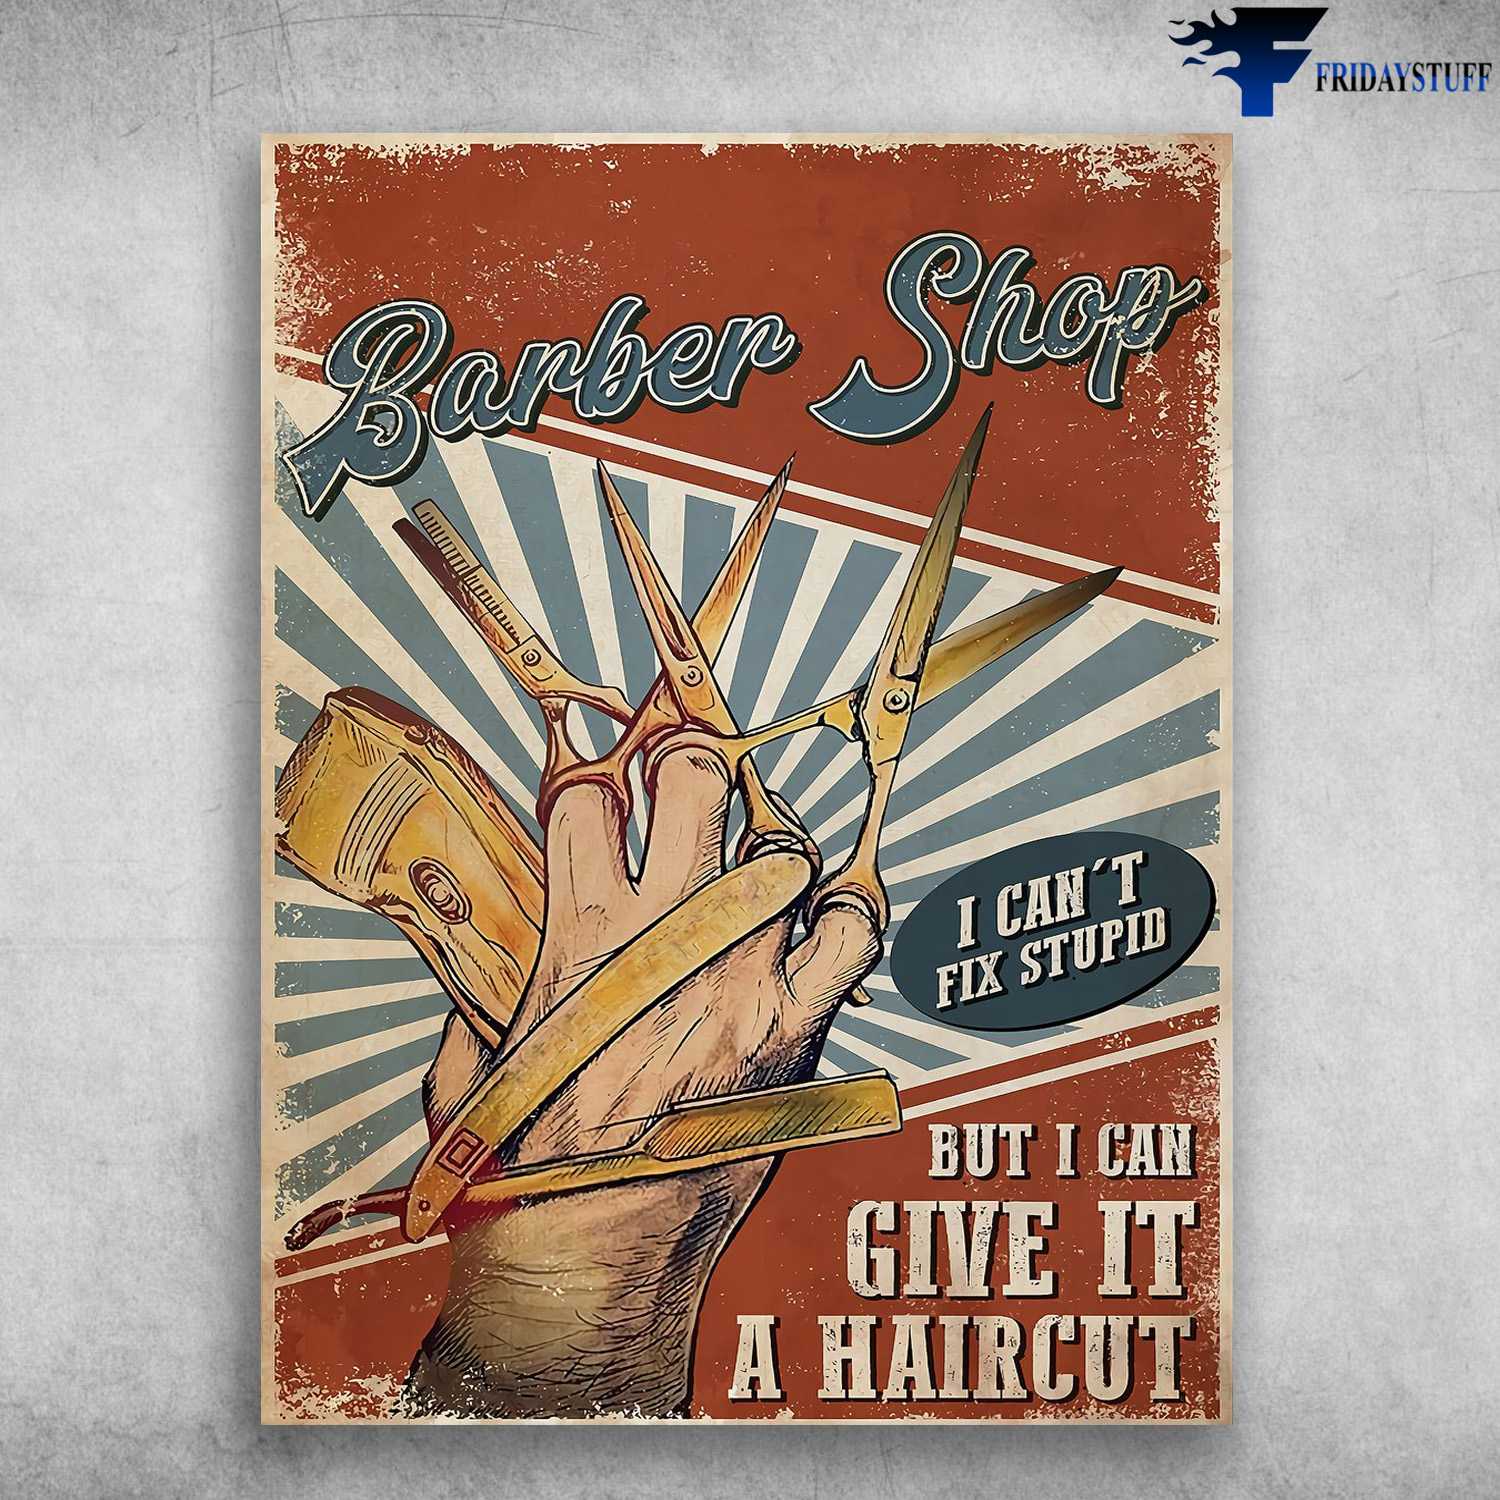 Barber Shop, Barber Poster - I Can't Fix Stupid, But I Can Give It Up, A Haircut